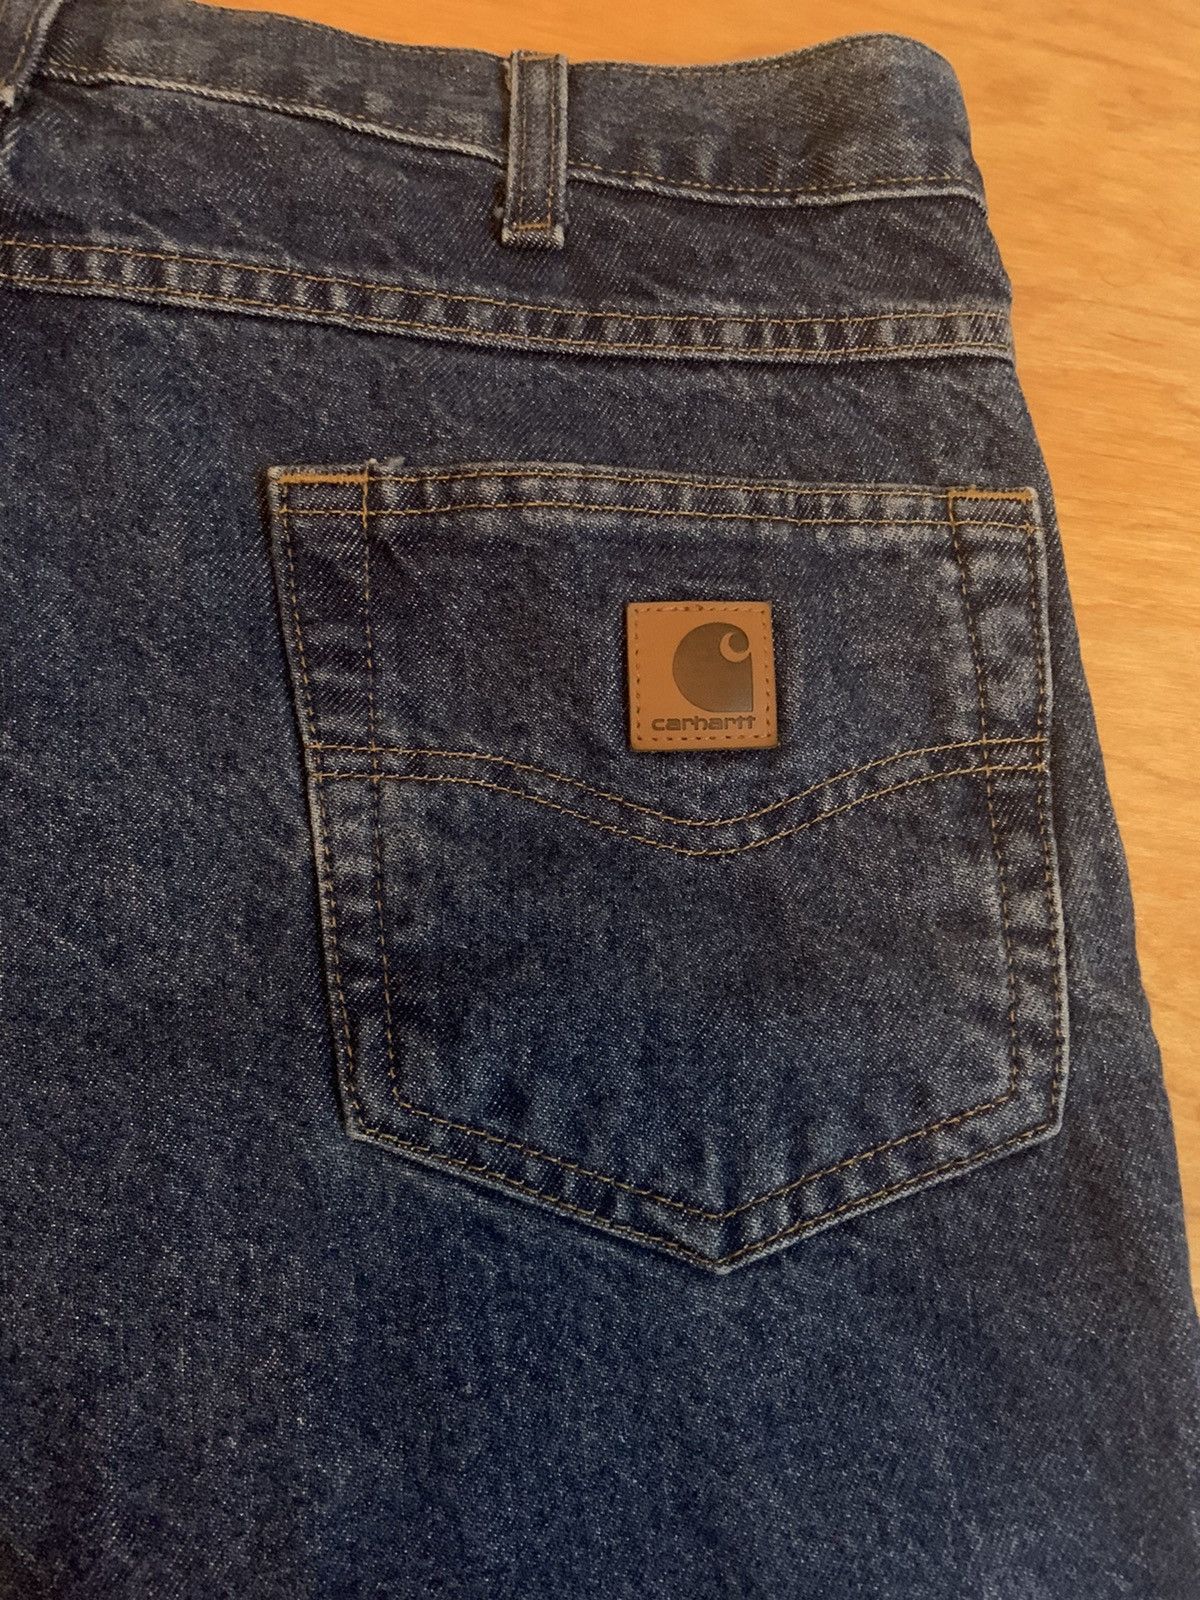 Carhartt Carhartt B17 Relaxed Fit Tapered Leg Blue Jeans | Grailed